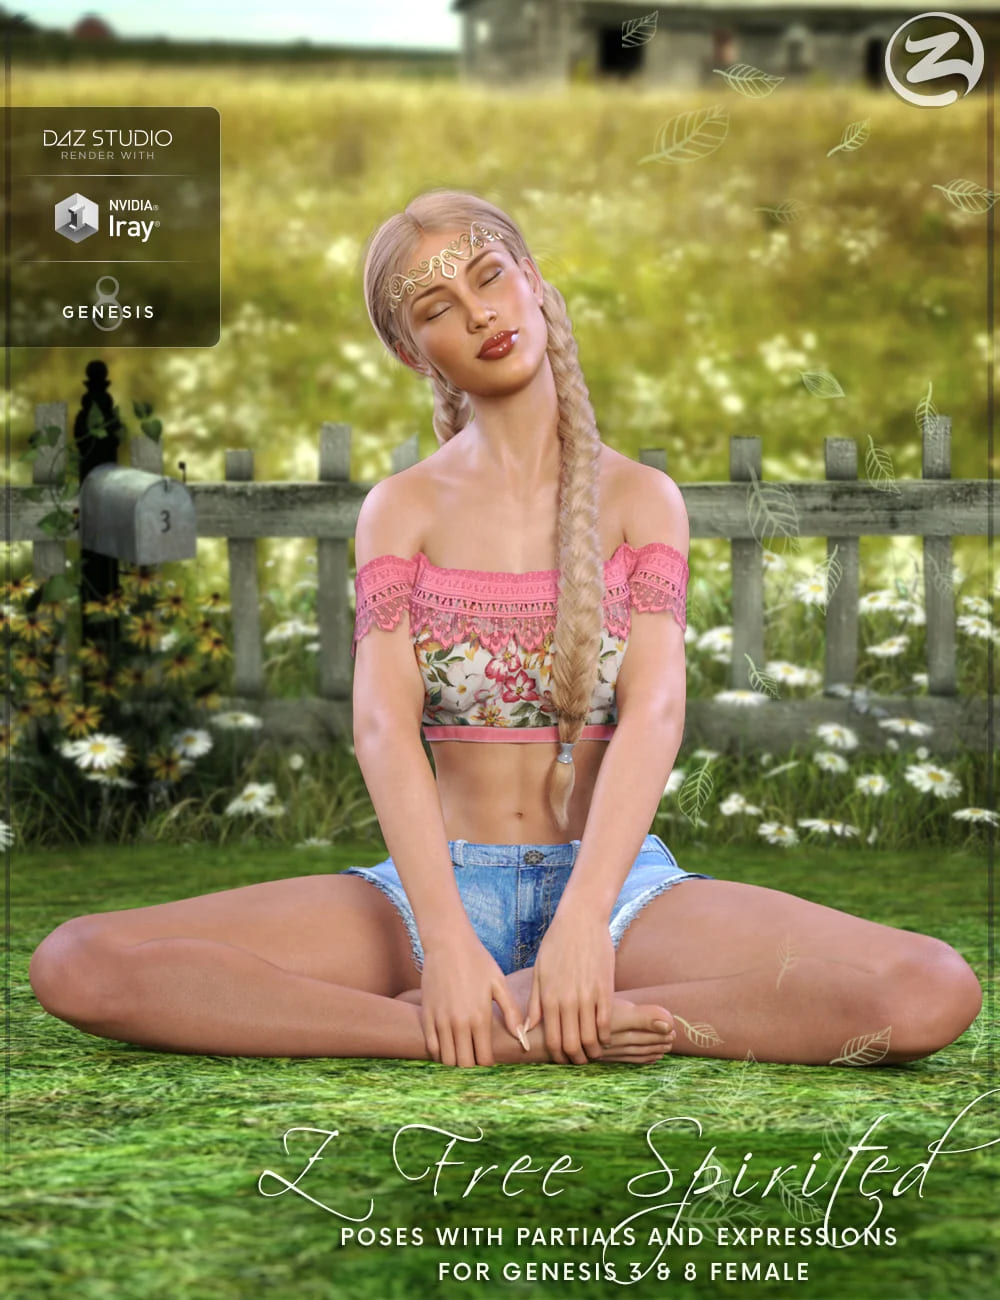 Z Free Spirited – Poses with Partials and Expressions for Genesis 3 & 8 Female_DAZ3DDL